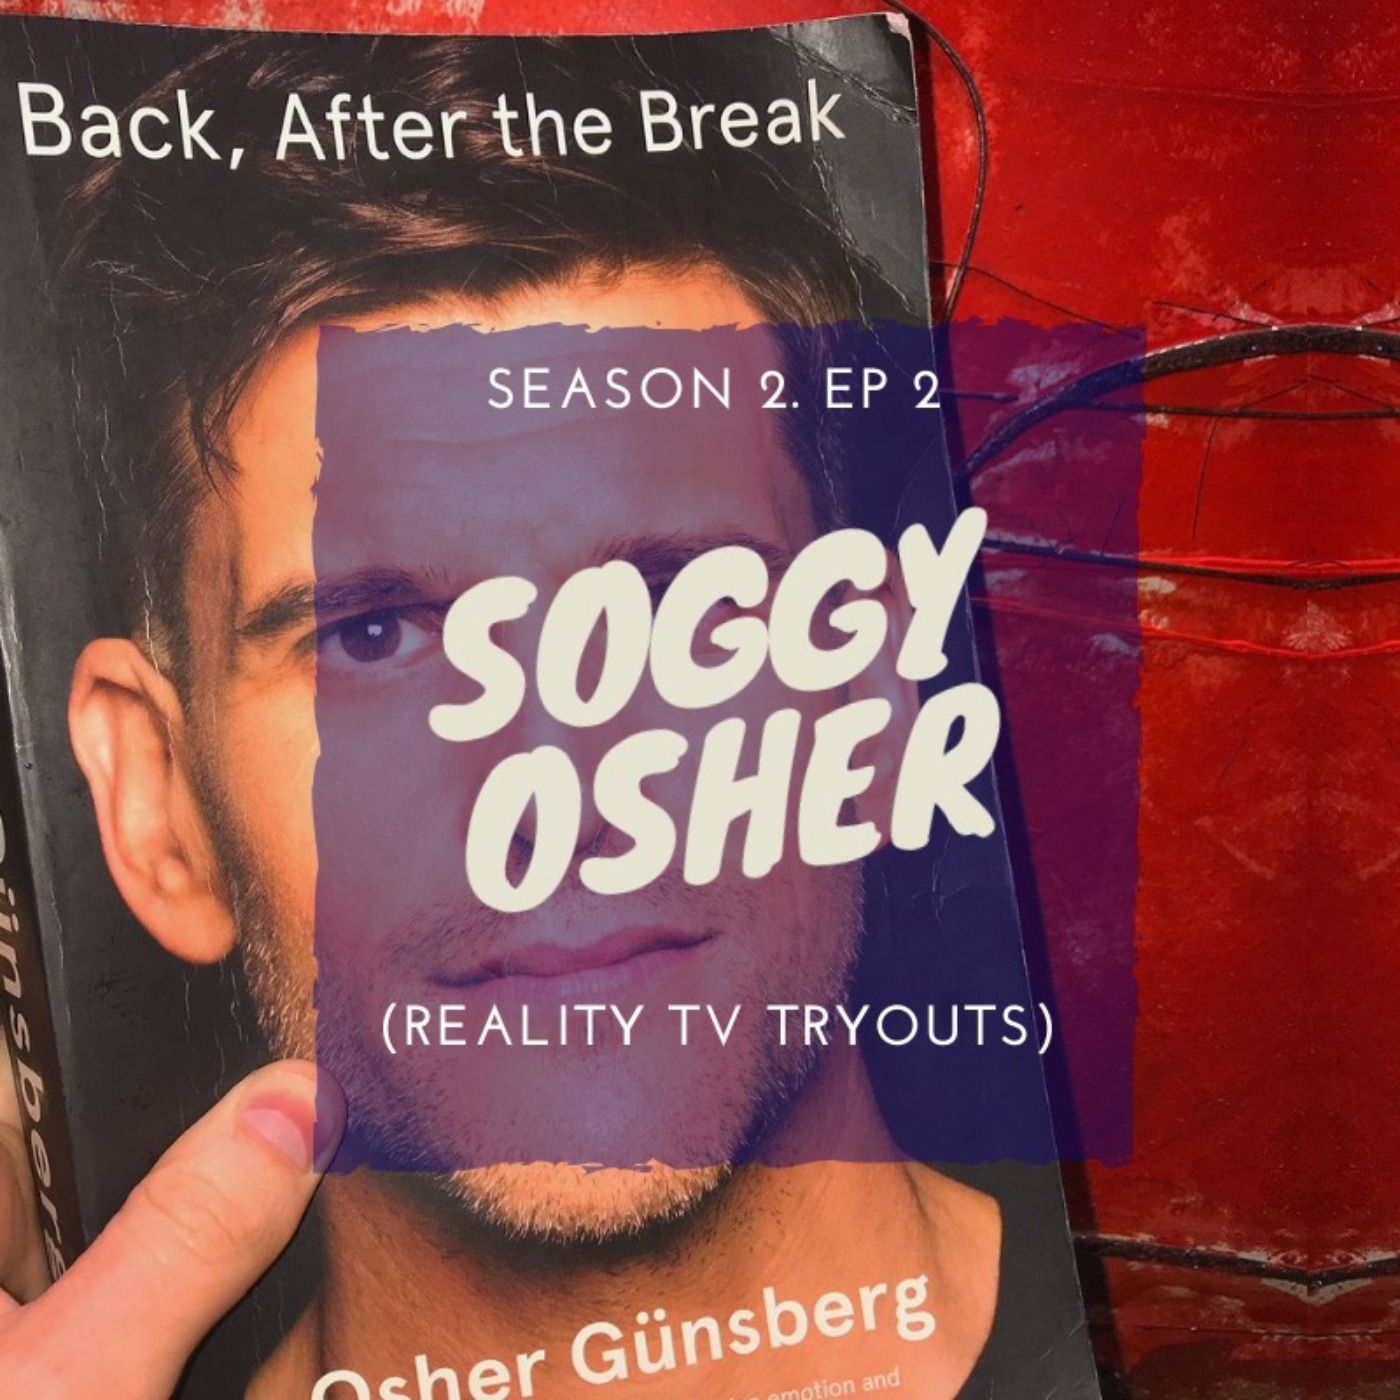 SOGGY OSHER (Reality TV Tryouts)